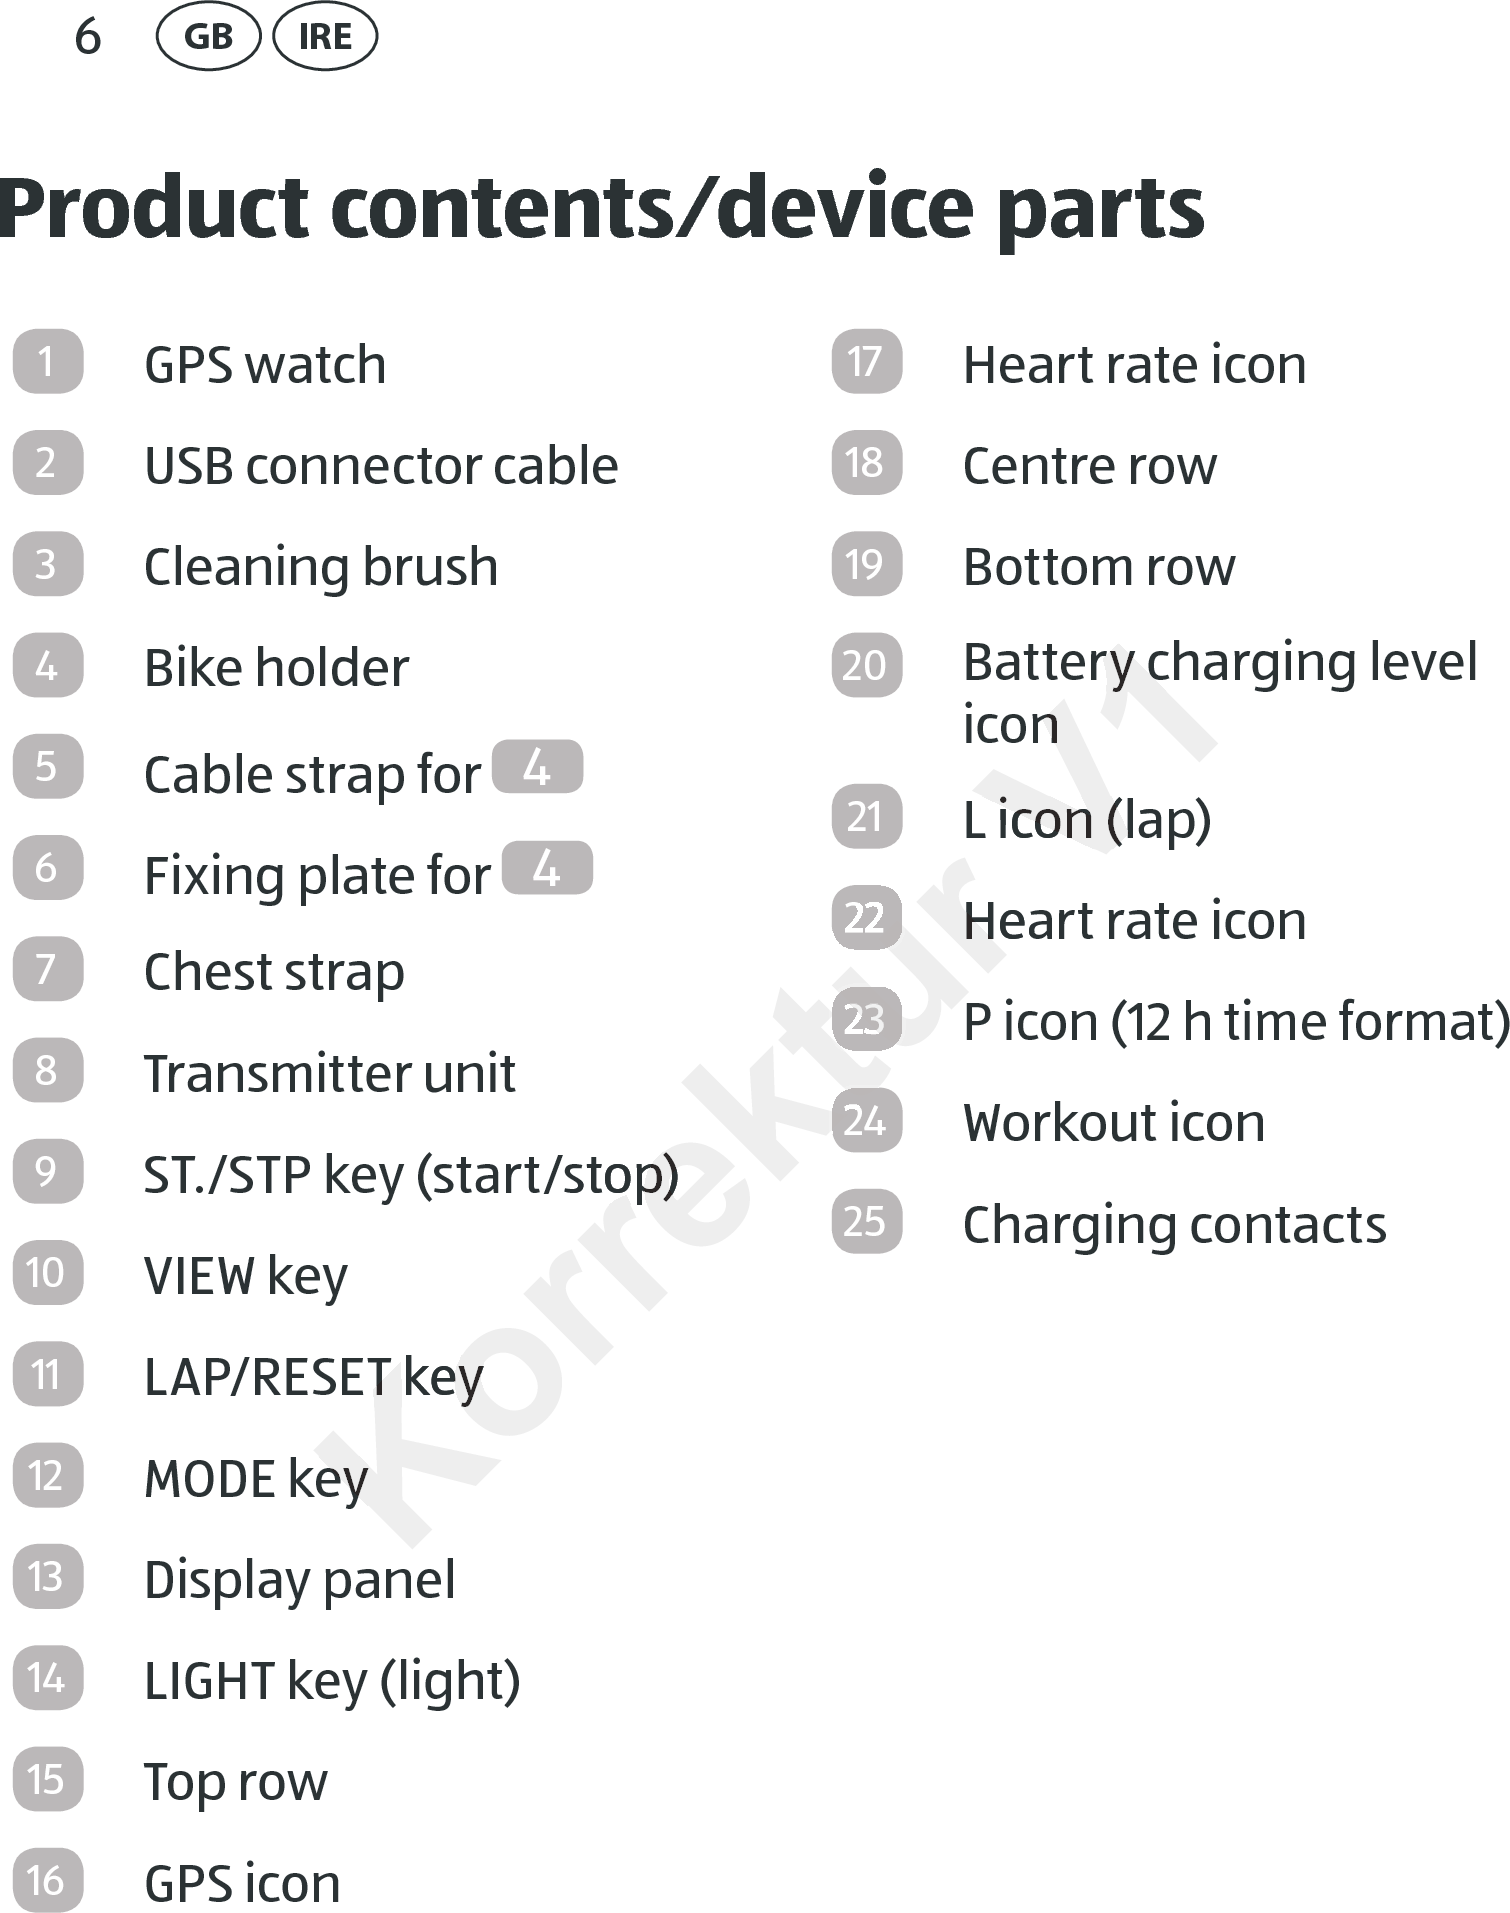 6GB IREProduct contents⁄device parts1GPS watch2USB connector cable3Cleaning brush4Bike holder5Cable strap for  46Fixing plate for  47Chest strap8Transmitter unit9ST./STP key (start/stop)10 VIEW key11 LAP/RESET key12 MODE key13 Display panel14 LIGHT key (light)15 Top row16 GPS icon17 Heart rate icon18 Centre row19 Bottom row20 Battery charging level icon21 L icon (lap)22 Heart rate icon23P icon (12 h time format)24 Workout icon25 Charging contactsKorrektur ST./STP key (start/stop)ST./STP key (start/stop)LAP/RESET keyLAP/RESET keyMODE keyMODE keyKorrektur Korrektur Heart rate iconHeart rate iconKorrektur 23Korrektur Korrektur 24Korrektur V1Battery charging level Battery charging level iconiconL icon (lap)L icon (lap)